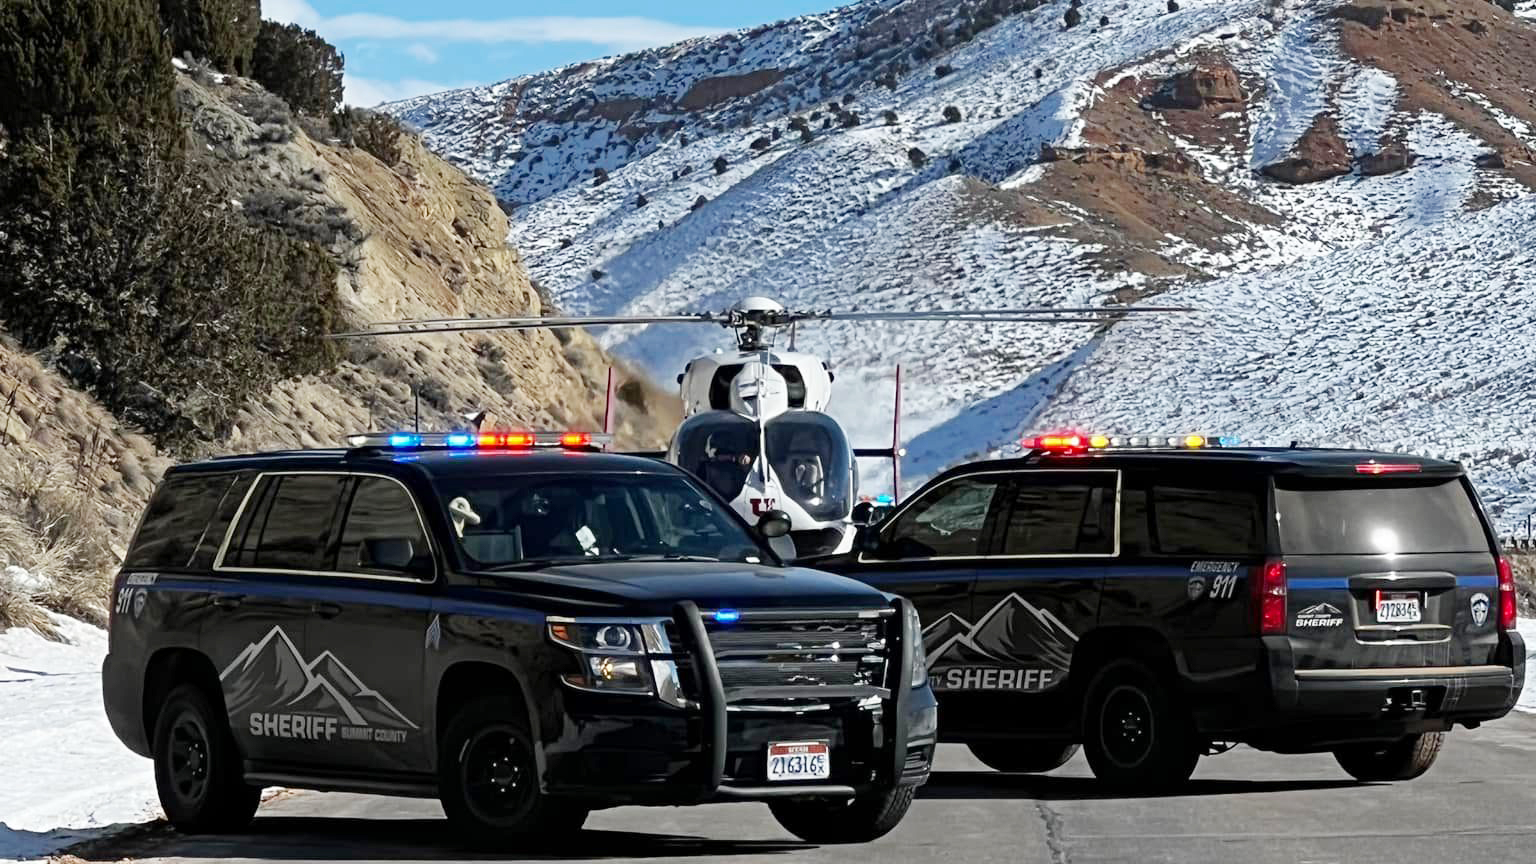 A 58-year-old woman was killed in an apparent accidental shooting in Utah's Summit County on Monday...